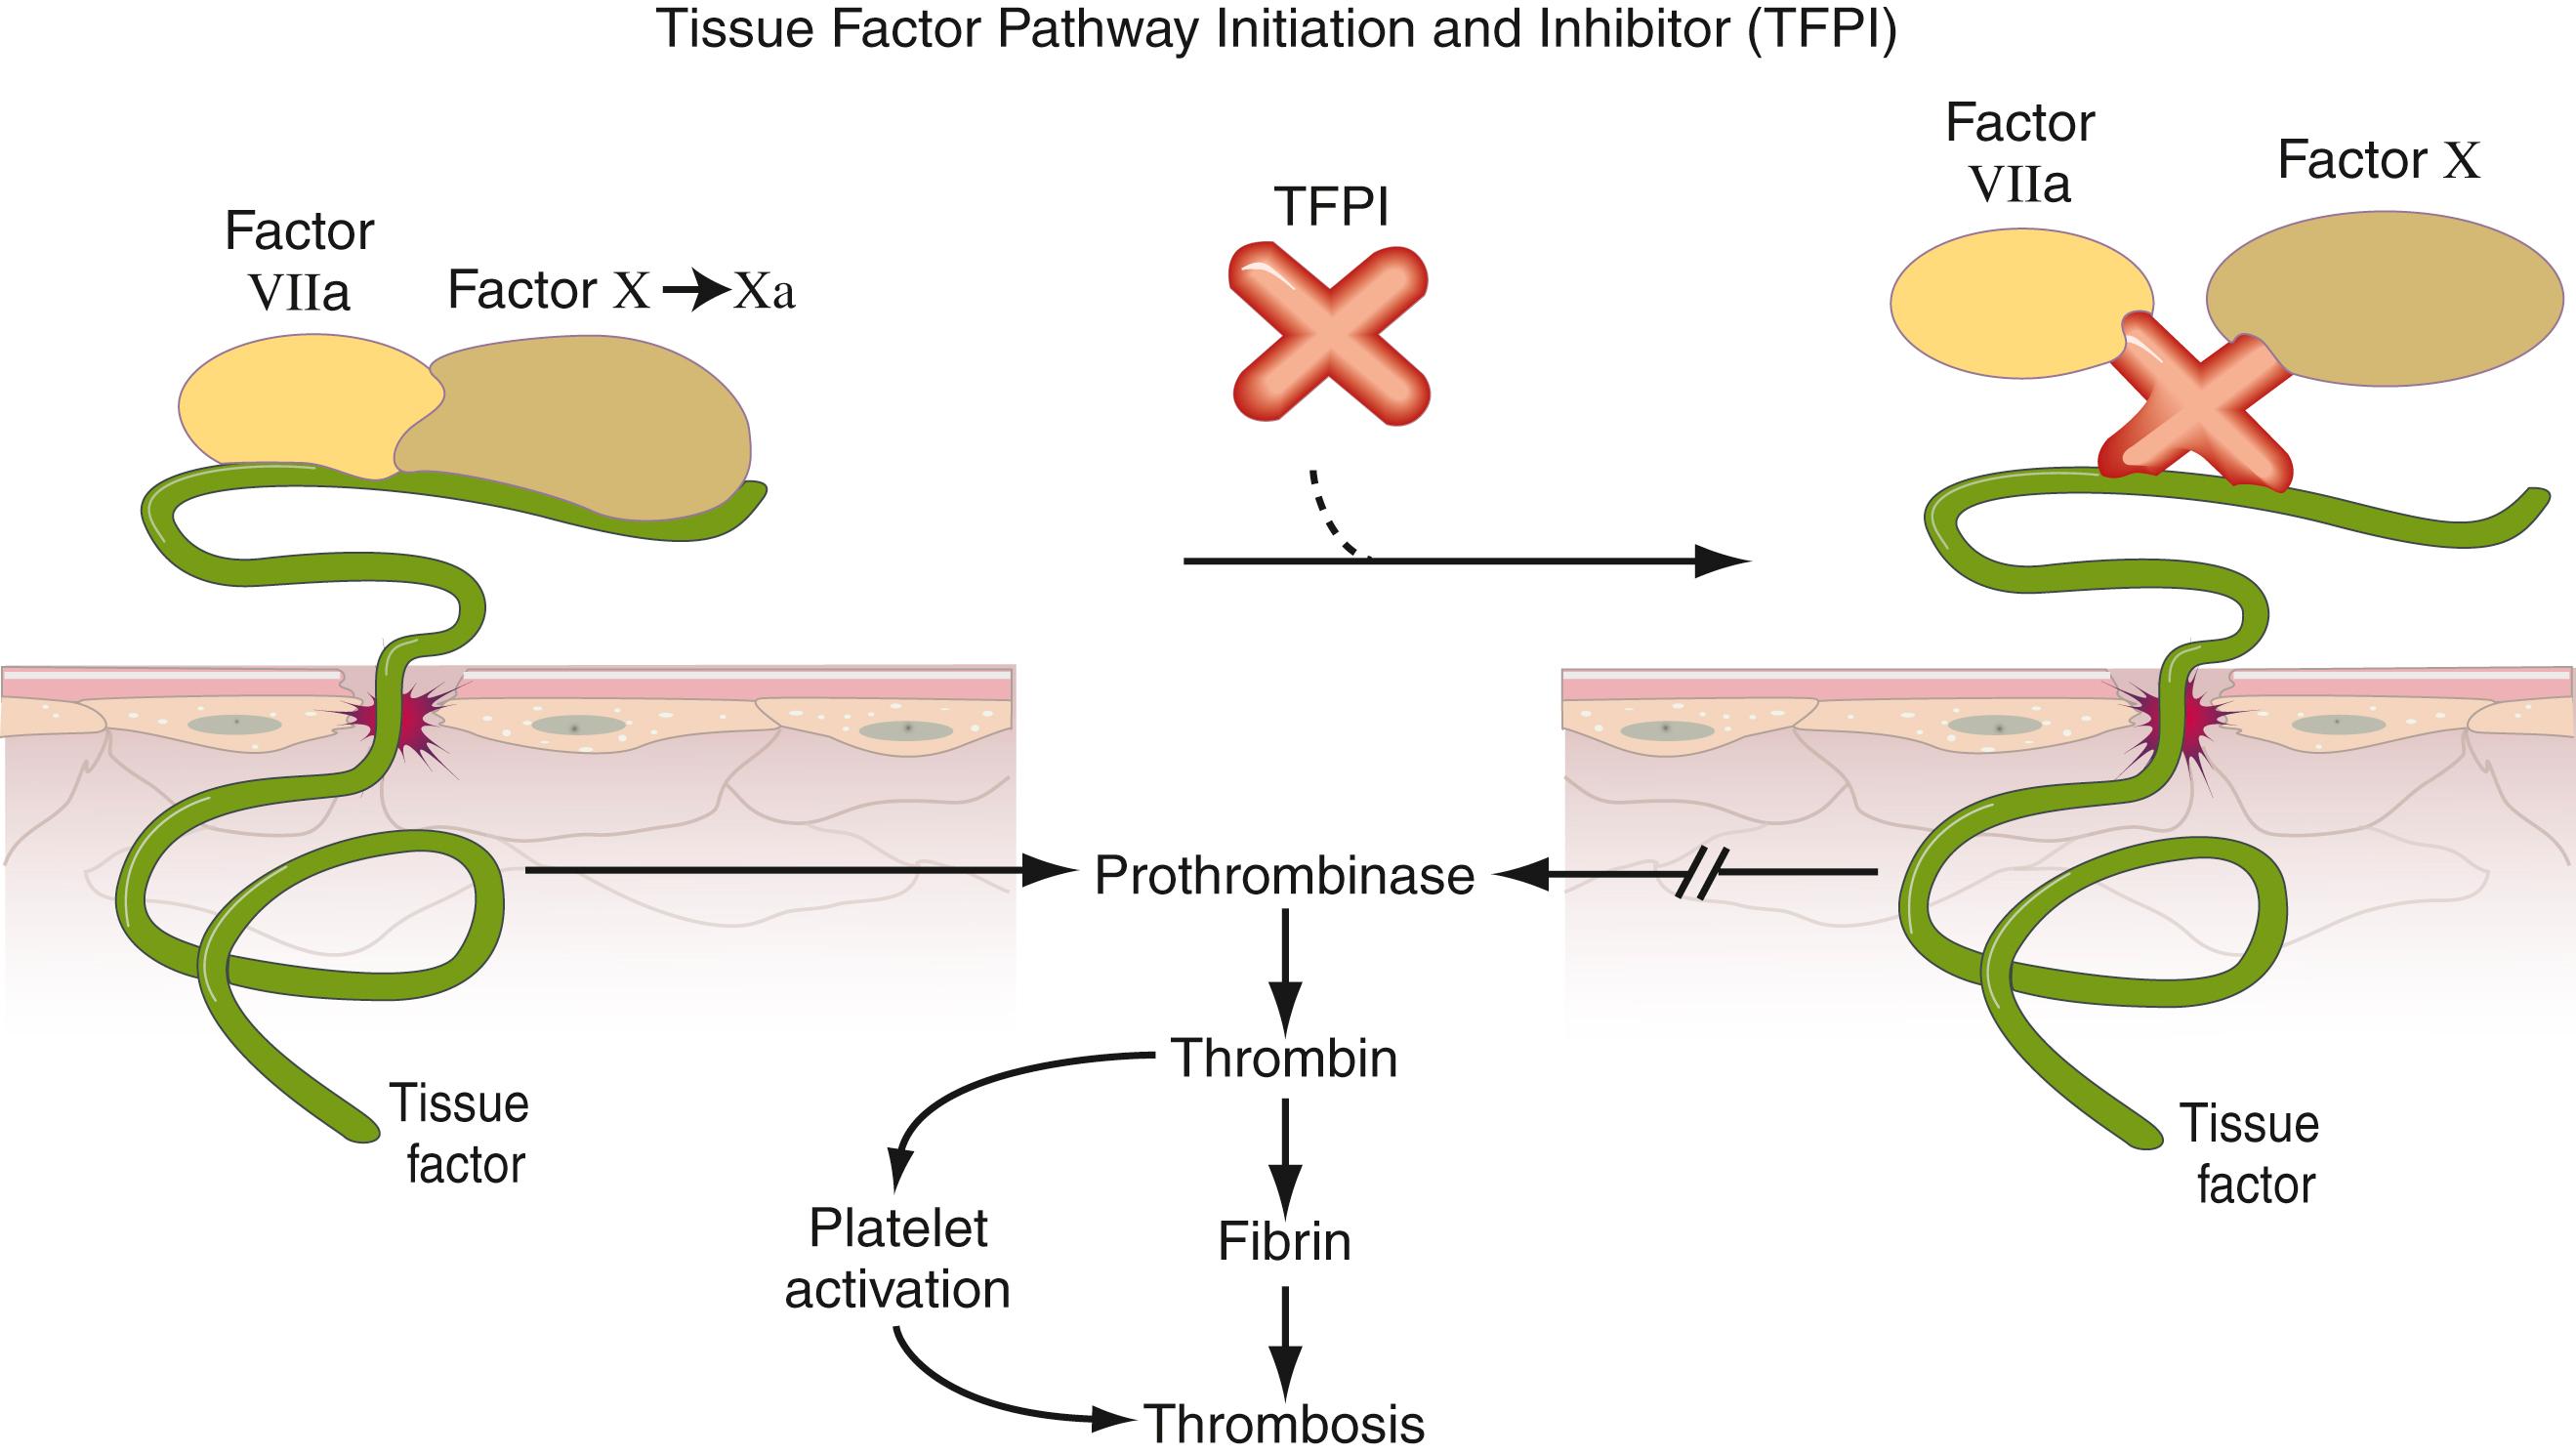 Figure 42.1, Tissue factor pathway initiation and inhibitor mechanisms. TFPI, Tissue factor pathway inhibitor.